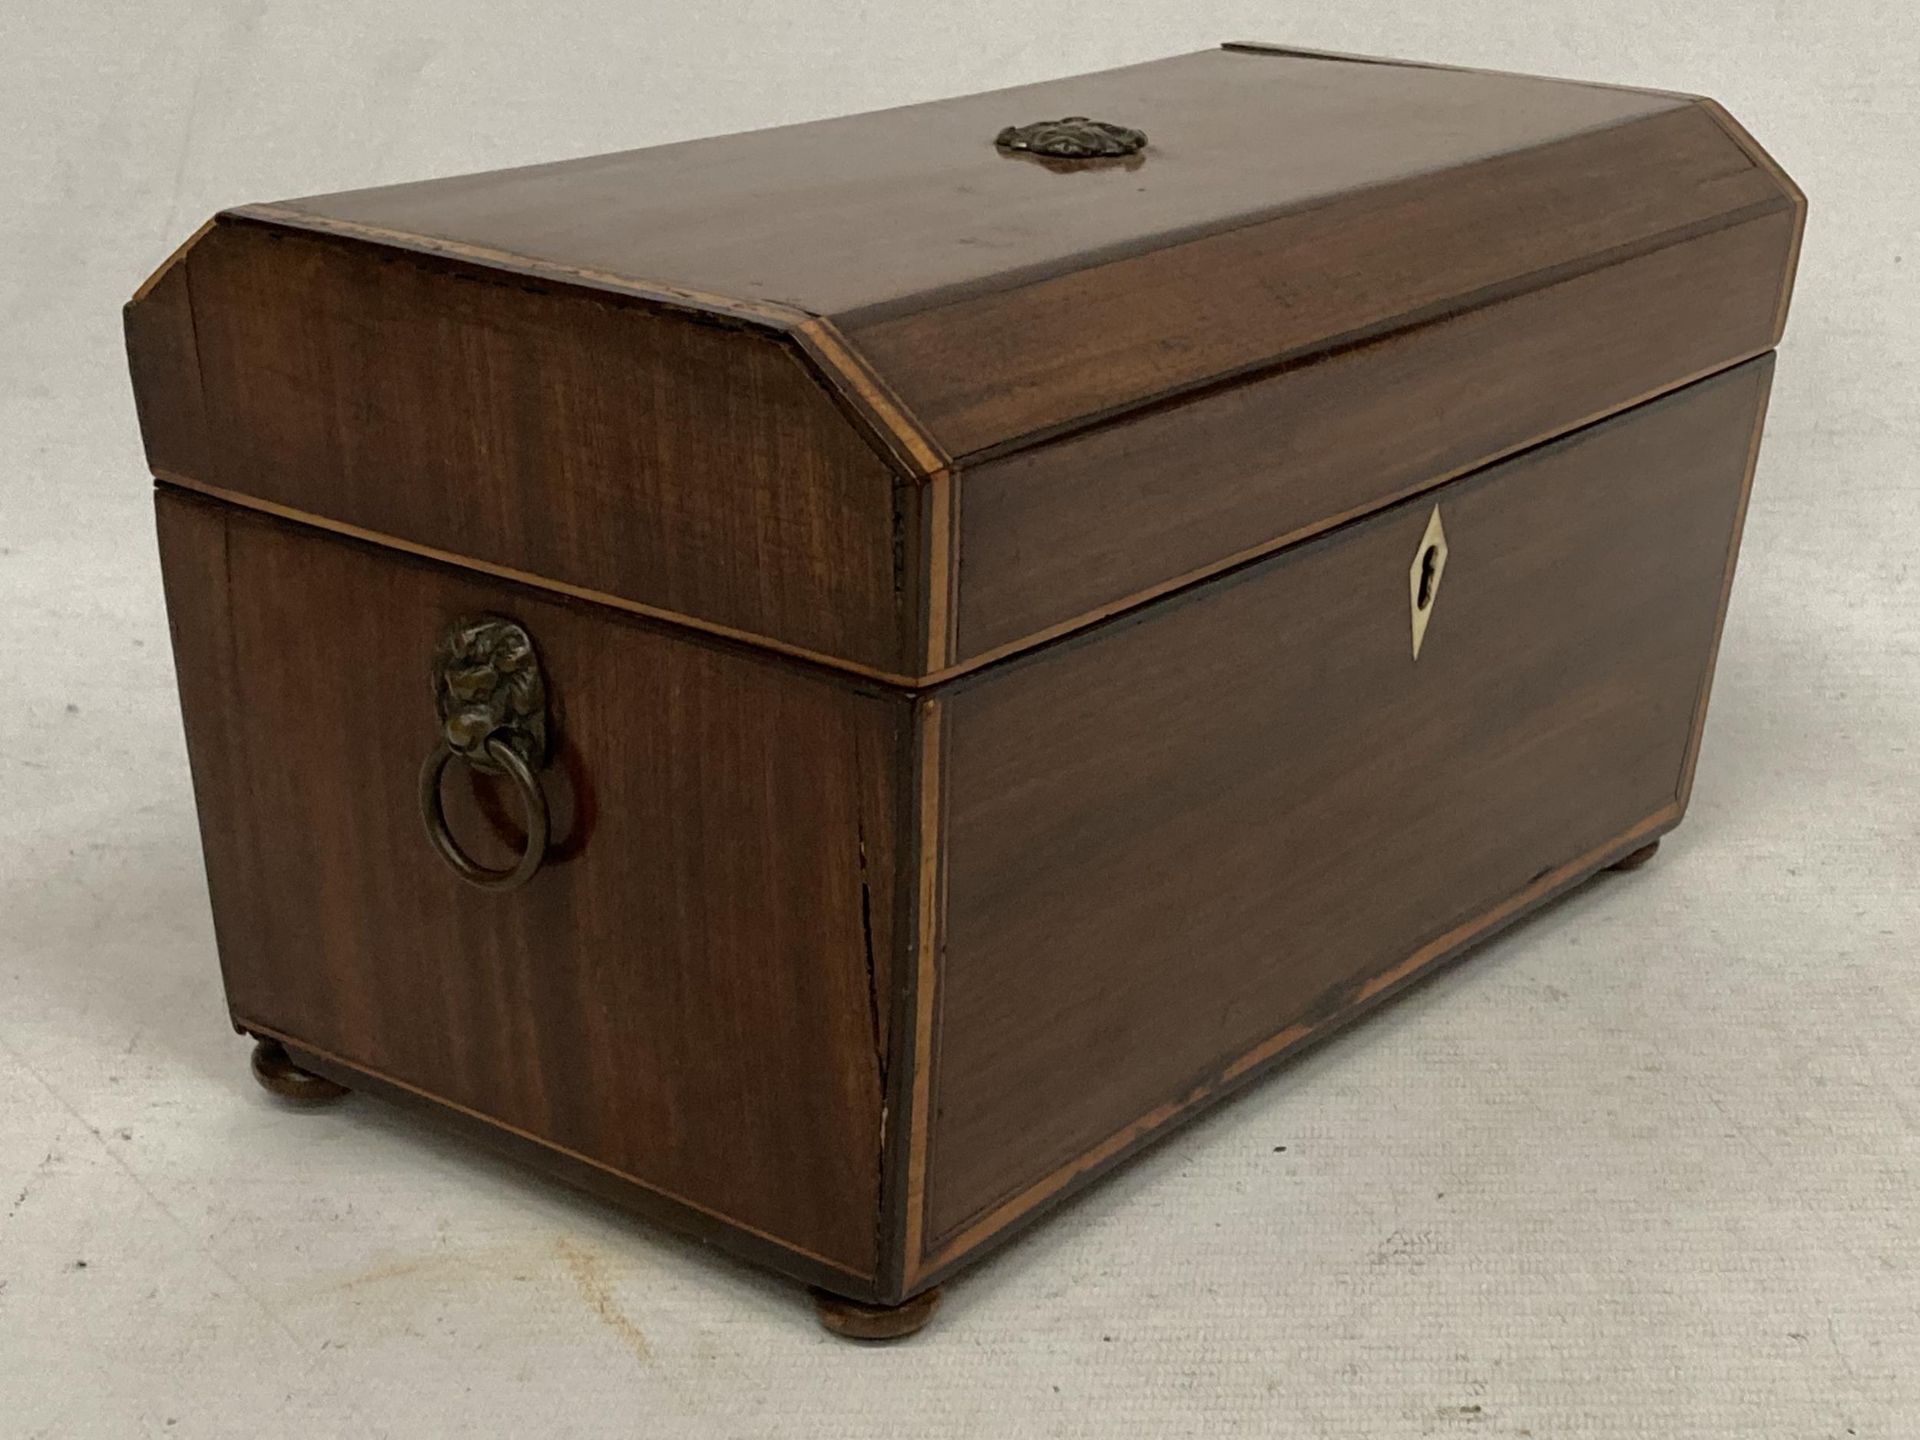 A GEORGIAN MAHOGANY TEA CADDY WITH THREE INNER COMPARTMENTS AND LION HANDLES - Image 3 of 4